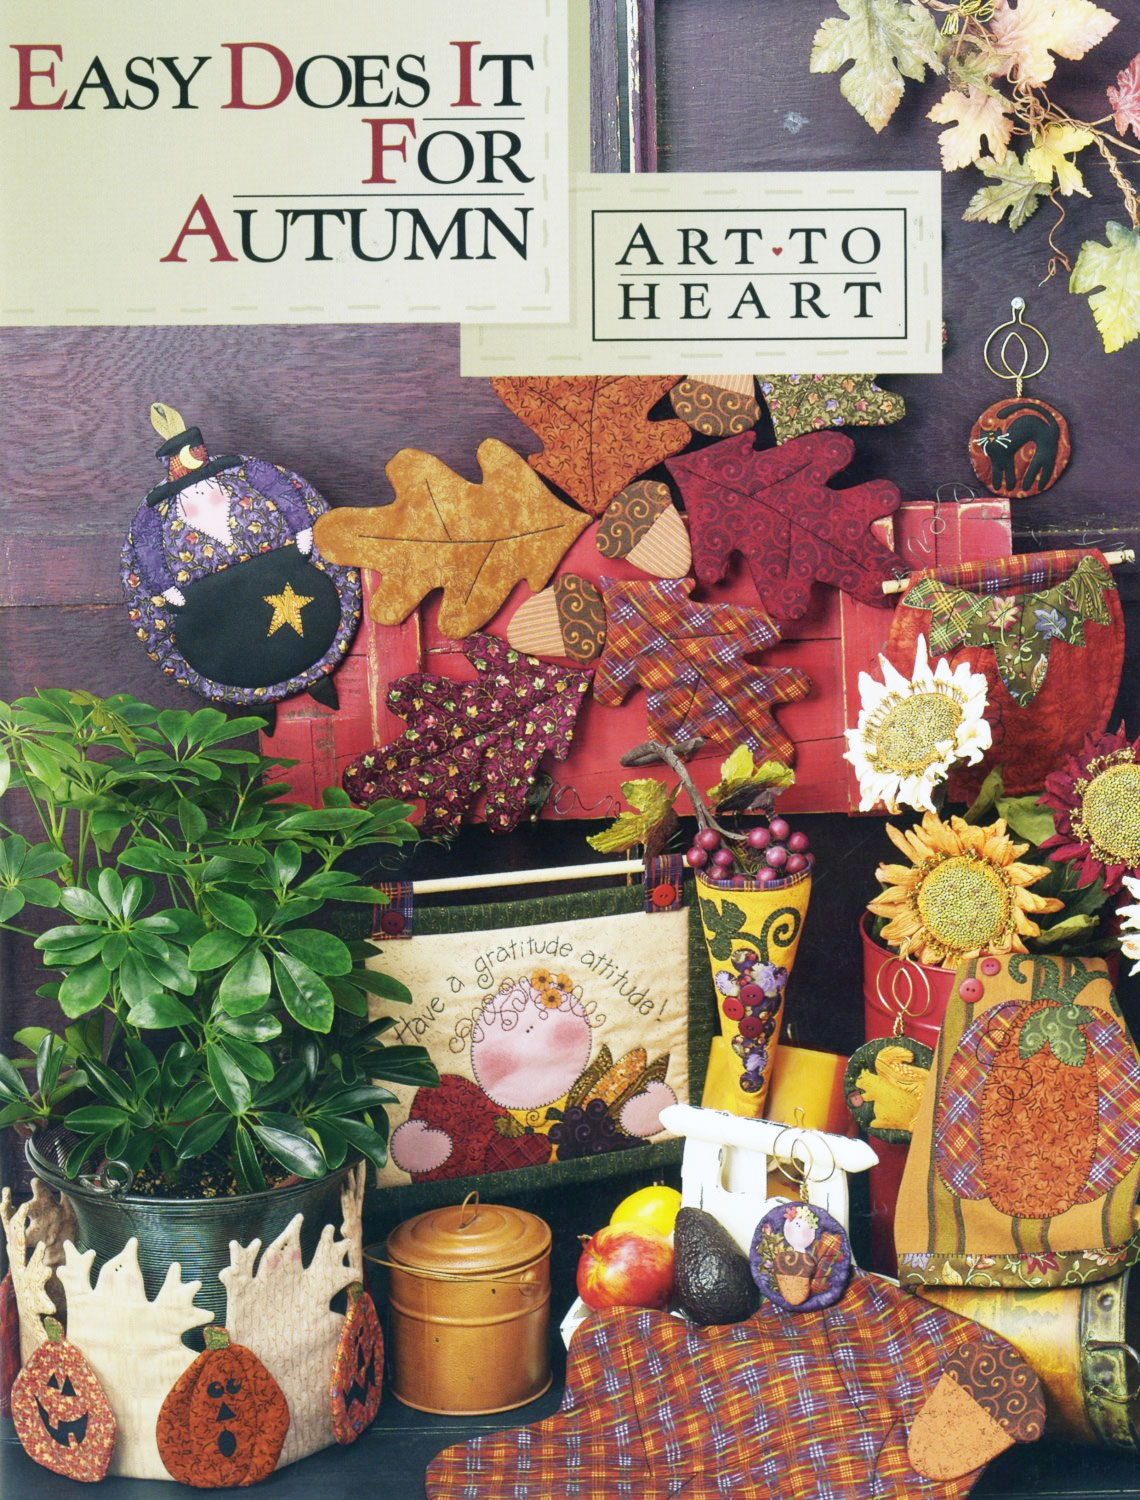 Easy-Does-It-For-Autumn-sewing-pattern-book-Art-To-Heart-front